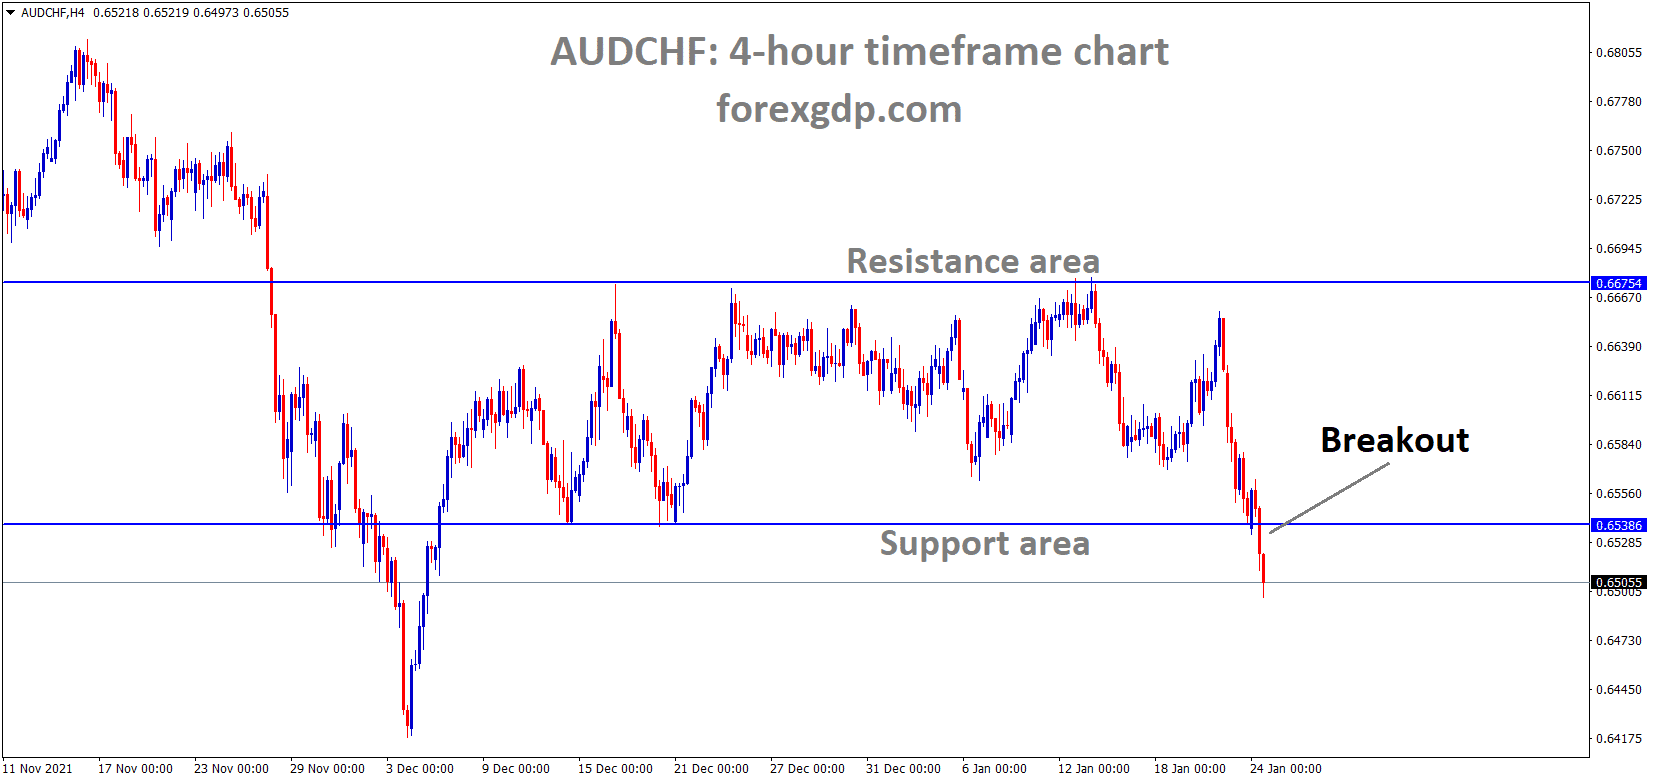 AUDCHF has broken the Box or consolidation pattern on the Downside.